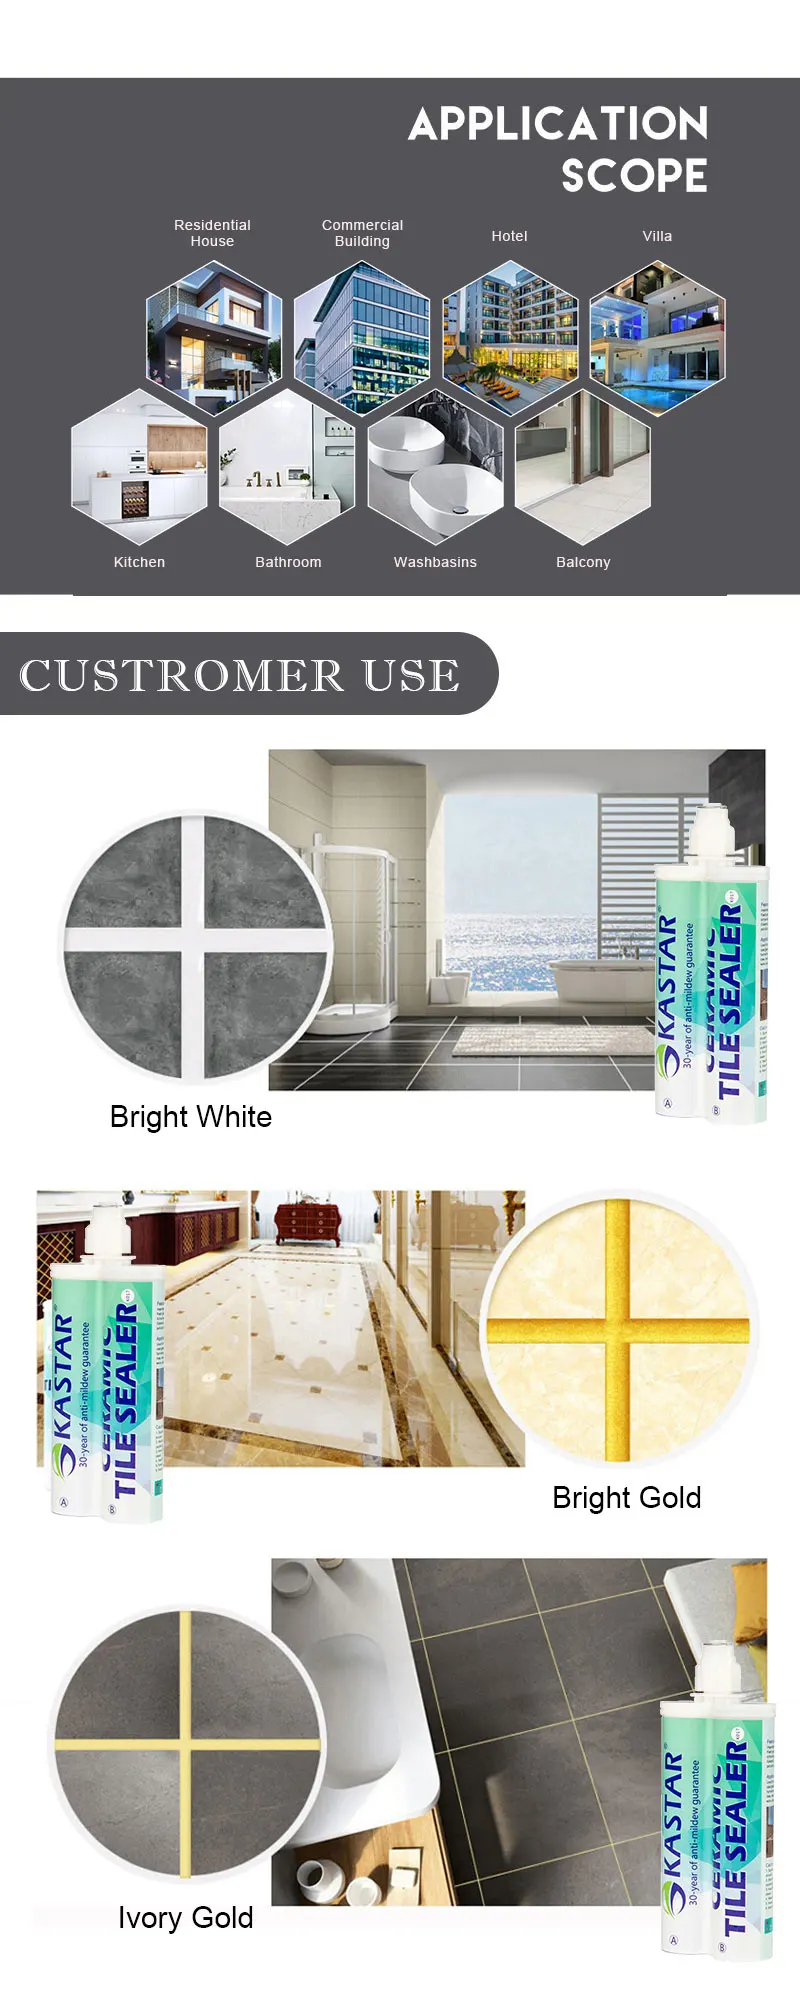 Easy Maintenance Premix Waterproof Colorfast Malaysia Cement Tile Adhesive For Bathroom And Kitchen Remodeling